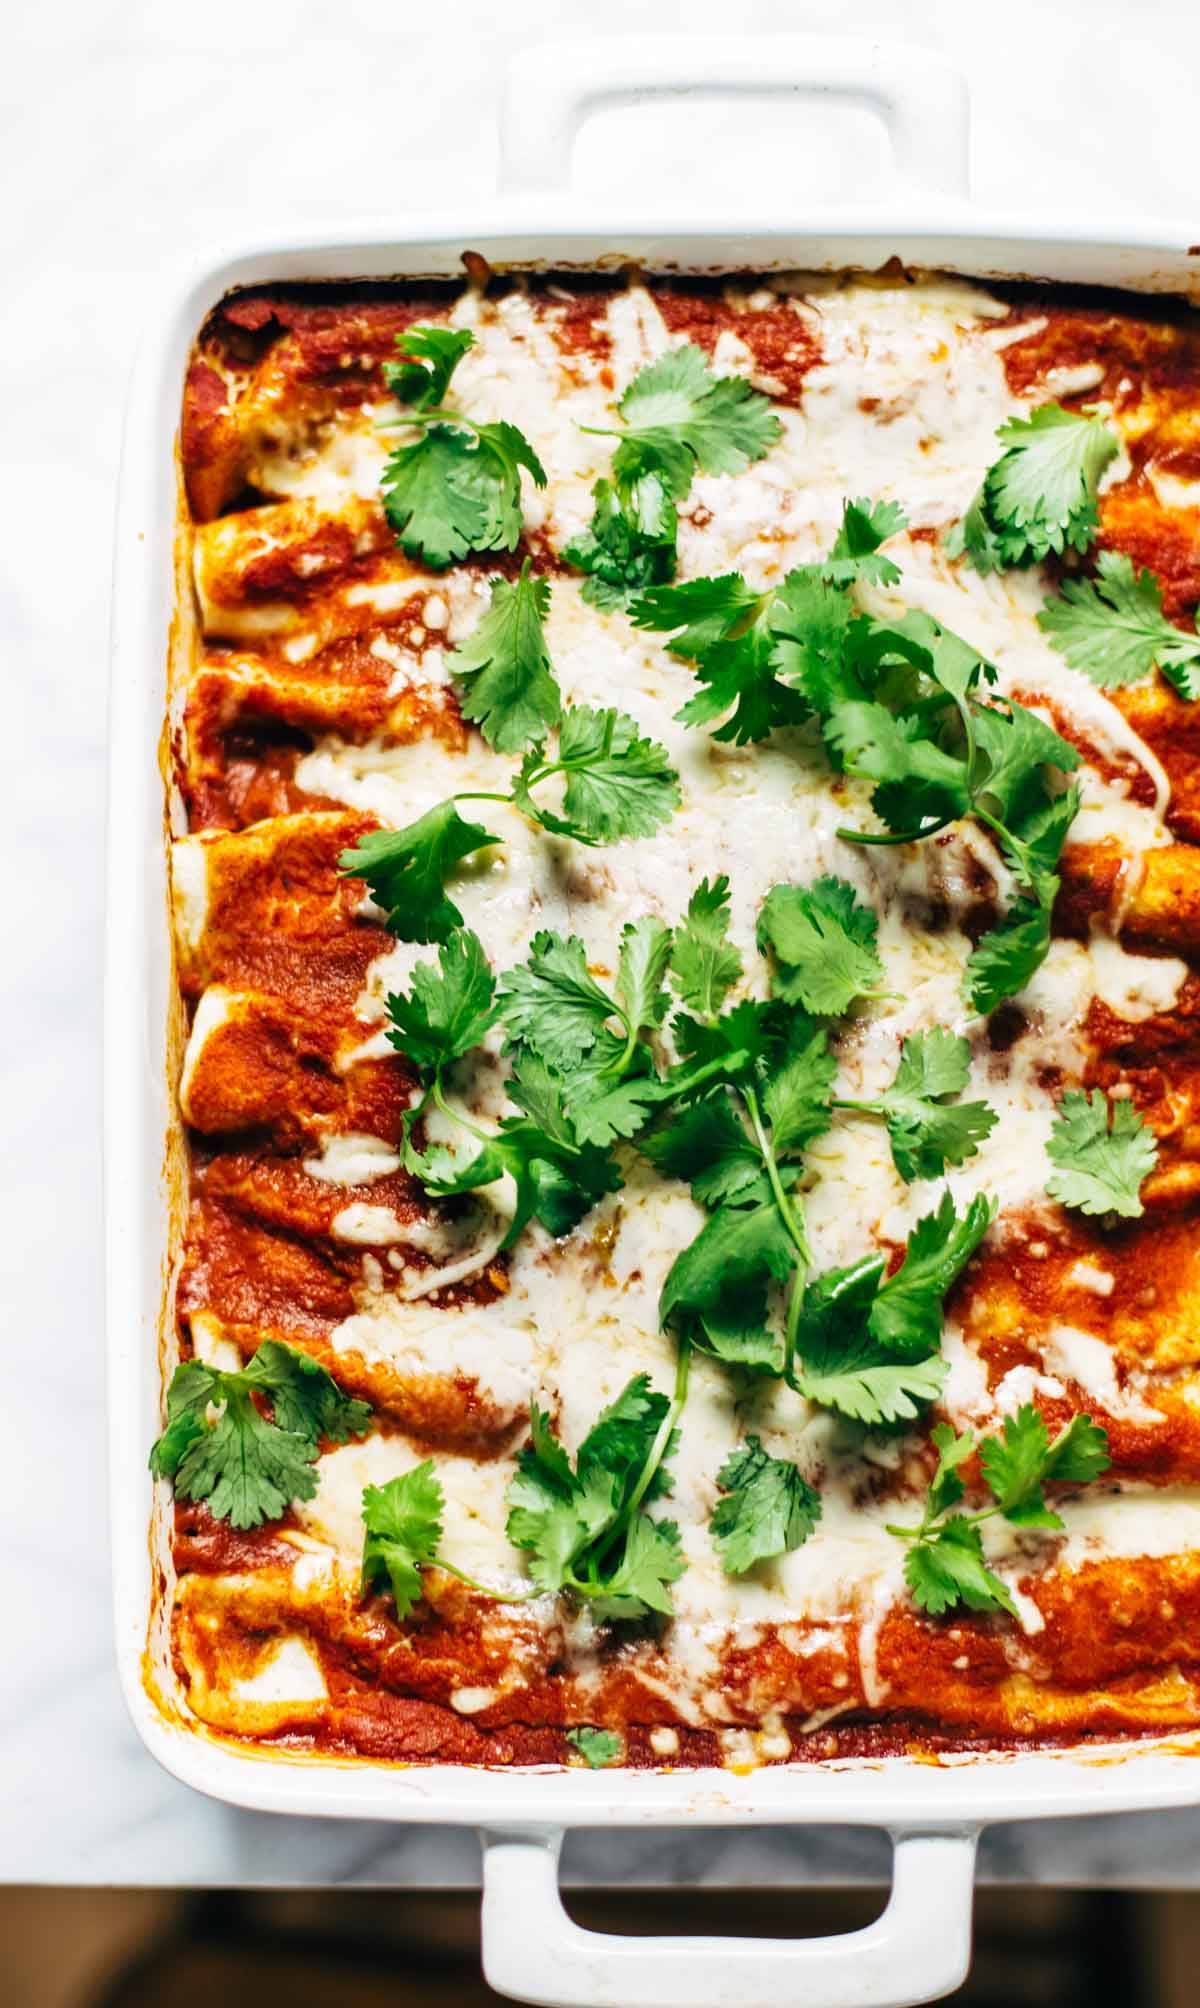 You won't believe how easy this recipe is! Comfort food meets REAL food with healthy, simple ingredients. SO deliciously good! | pinchofyum.com